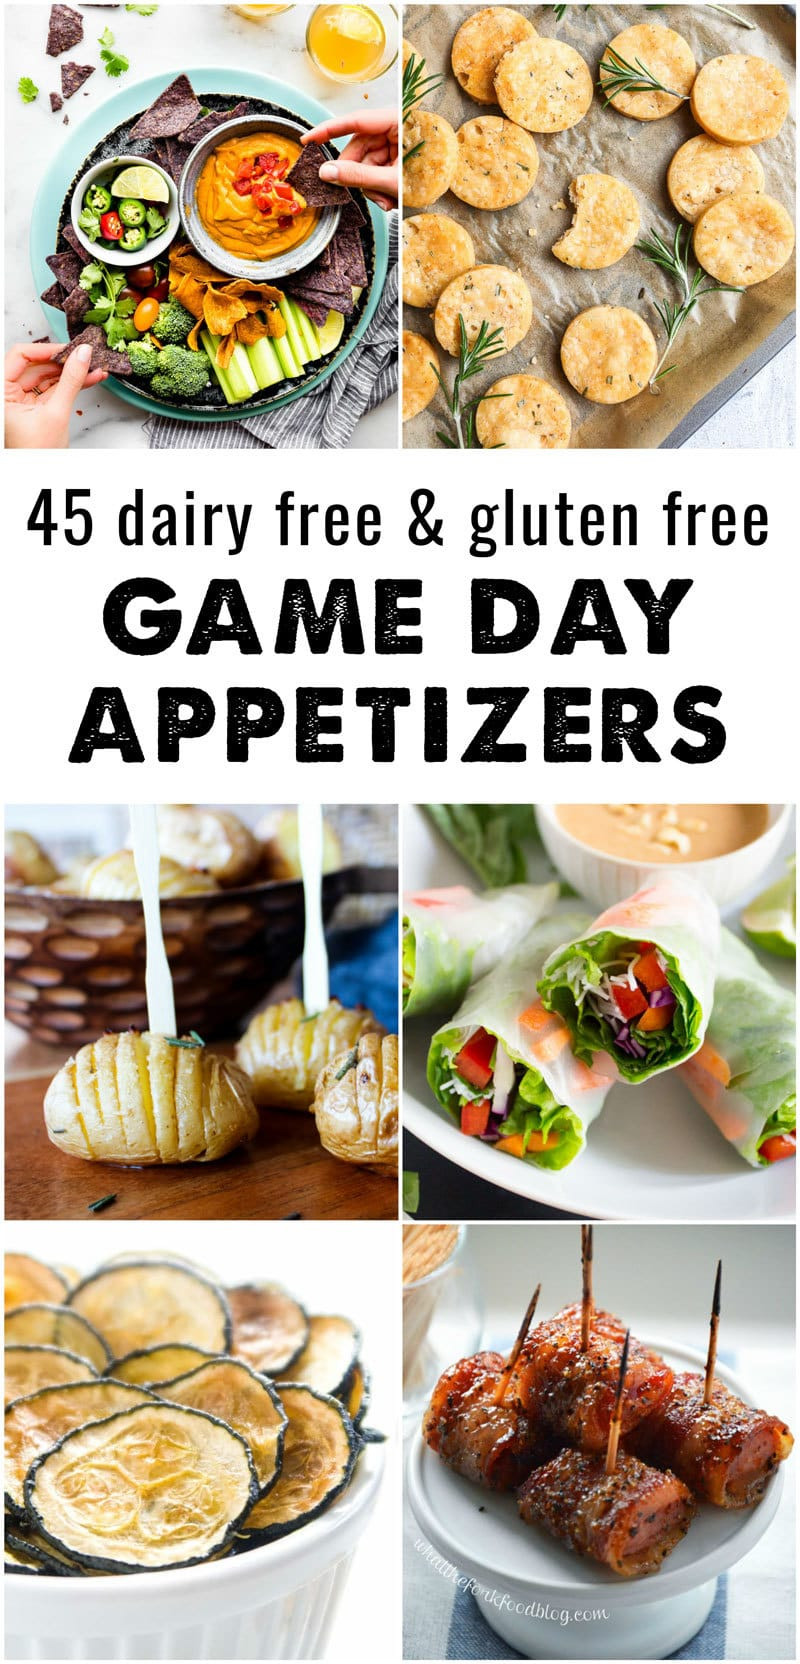 Dairy Free Appetizers
 45 Dairy Free and Gluten Free Appetizers • The Fit Cookie